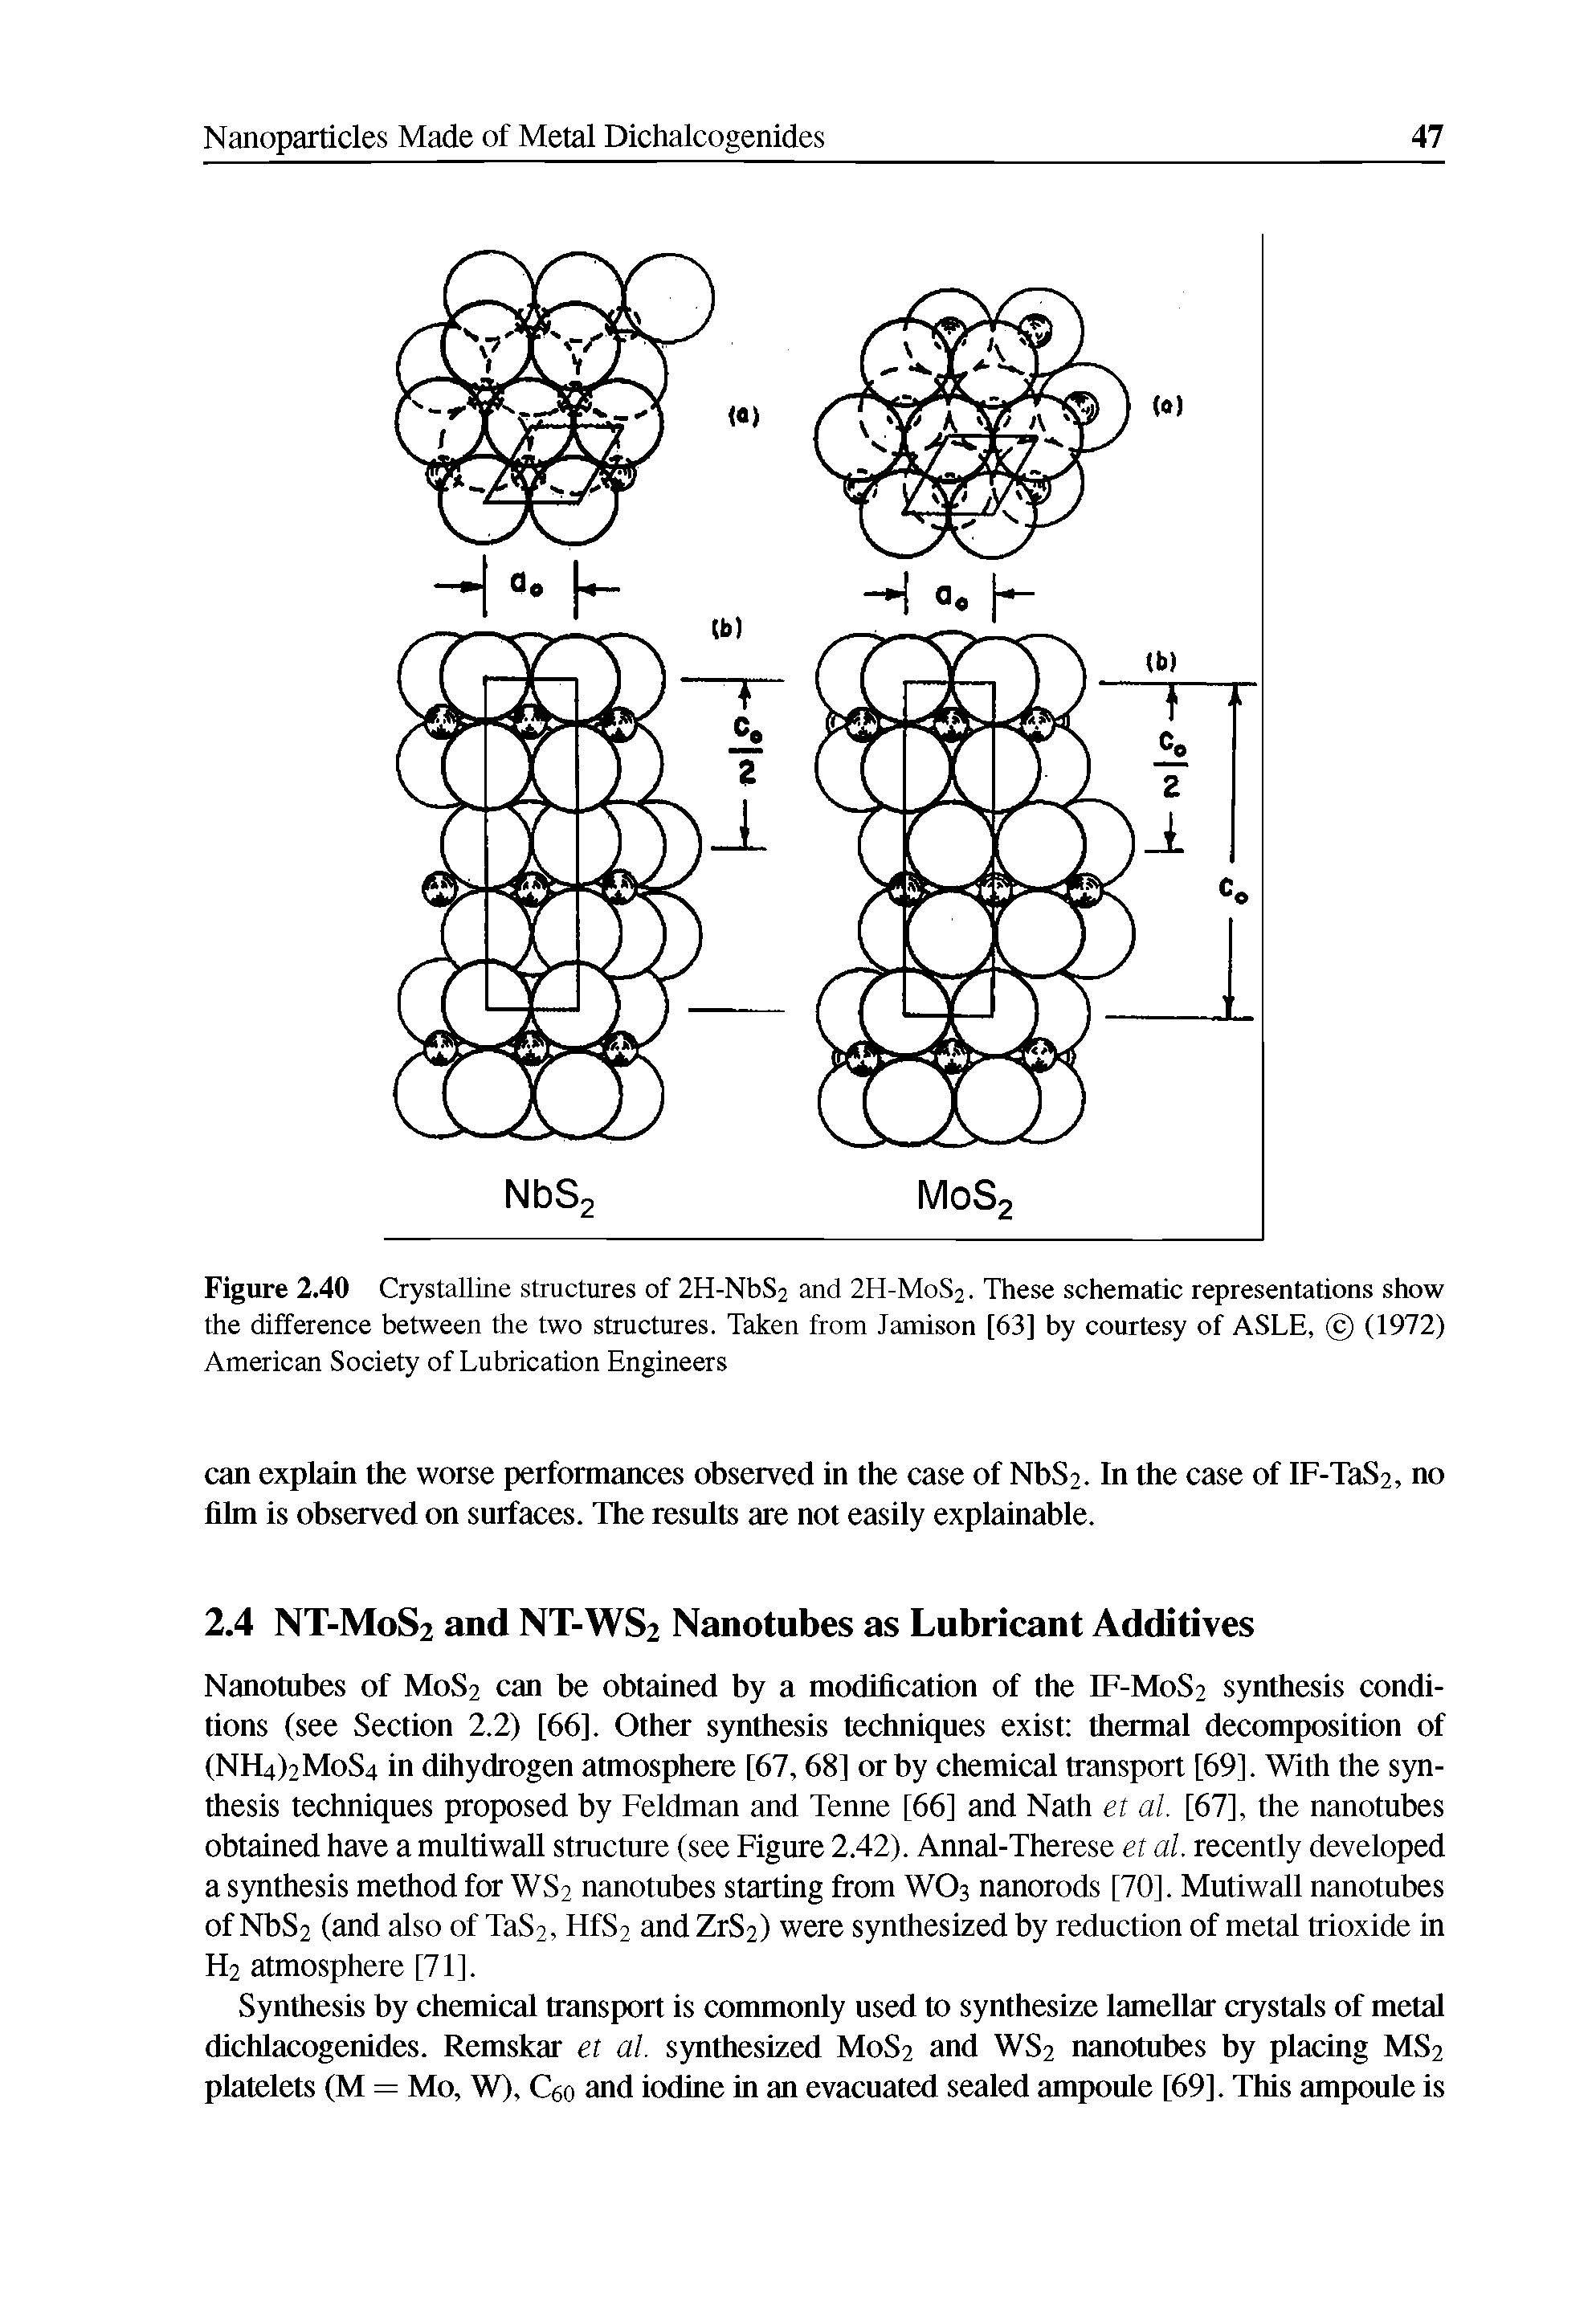 Figure 2.40 Crystalline structures of 2H-NbS2 and 2H-M0S2. These schematic representations show the difference between the two structures. Taken from Jamison [63] by courtesy of ASLE, (1972) American Society of Lubrication Engineers...